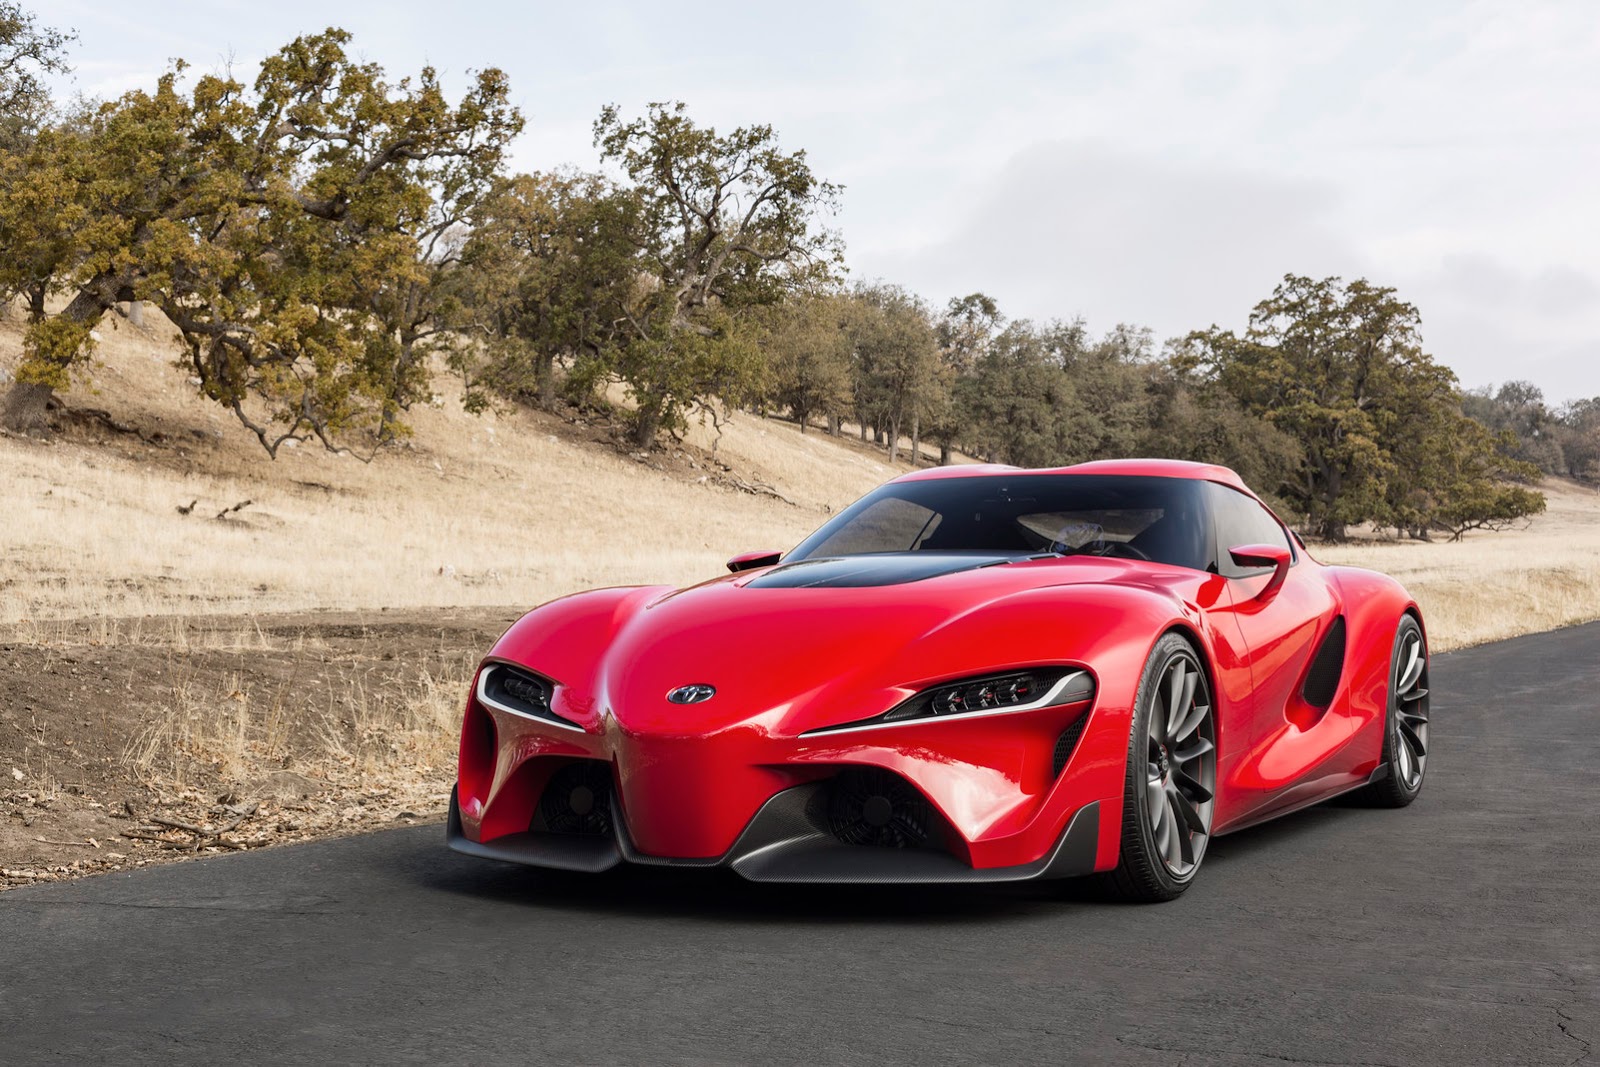 Toyota Supra Concept is based on the FT 1 Concept 1